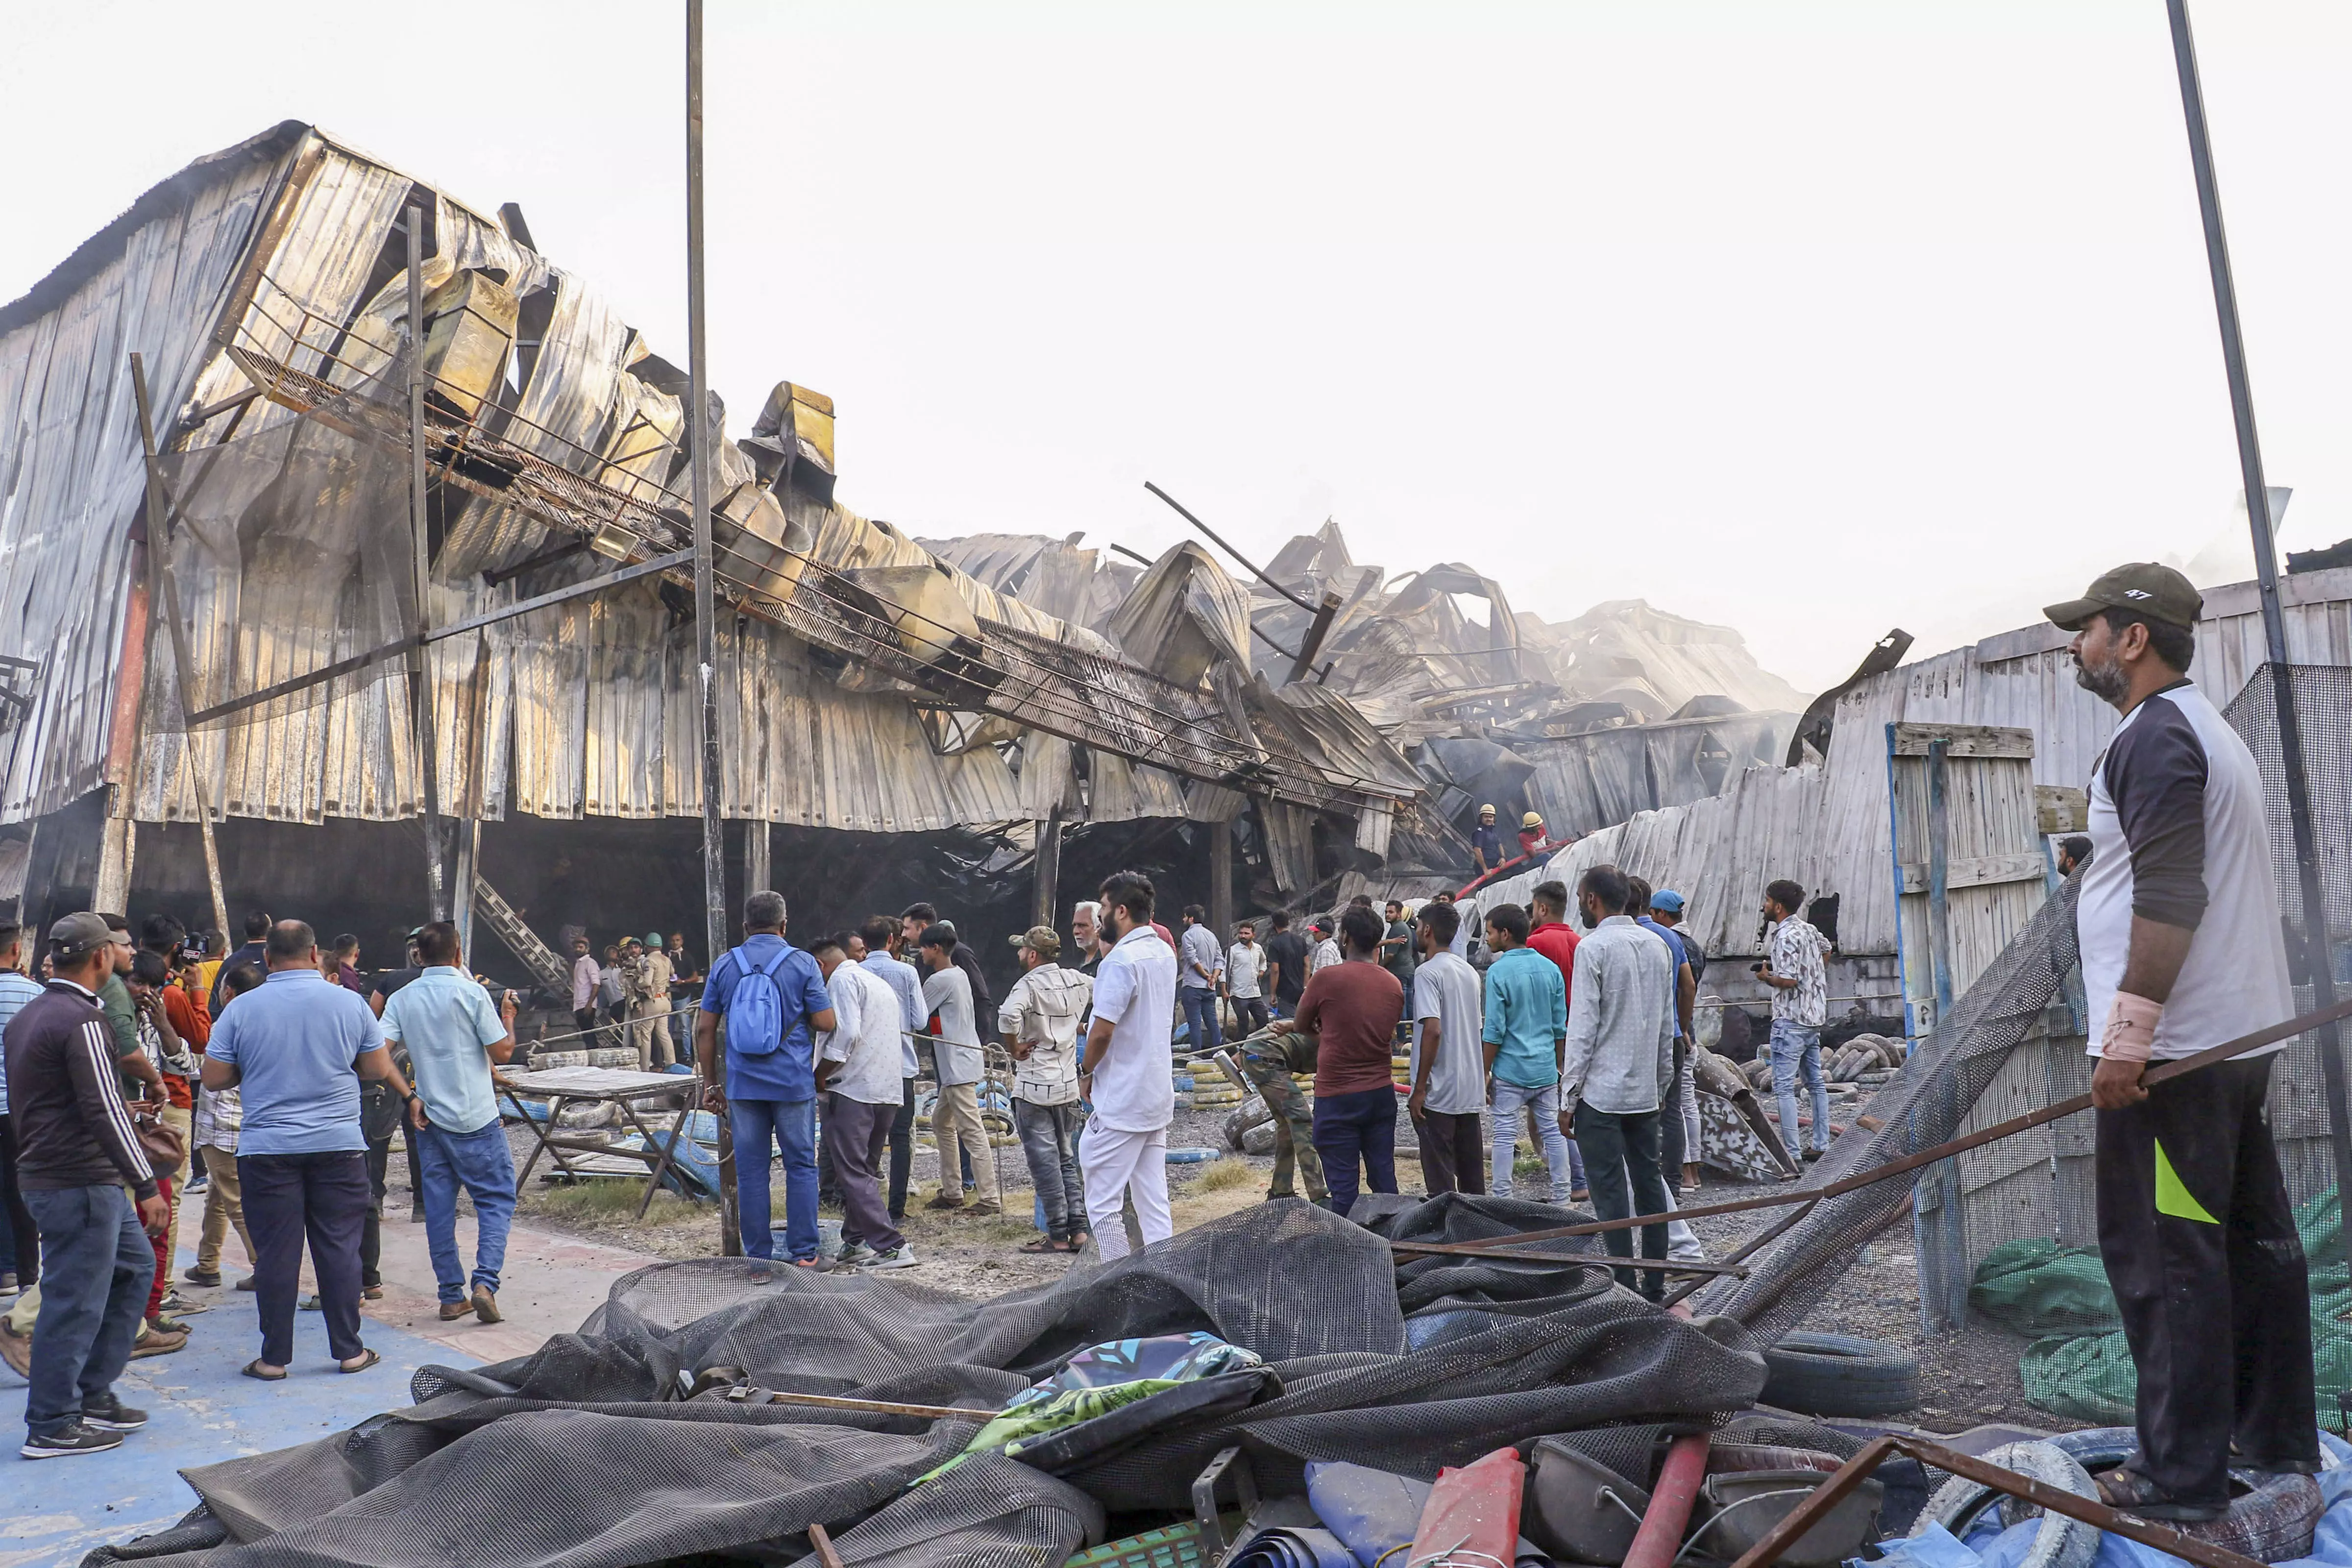 Rajkot game zone fire death toll rises to 33; DNA samples taken to identify dead